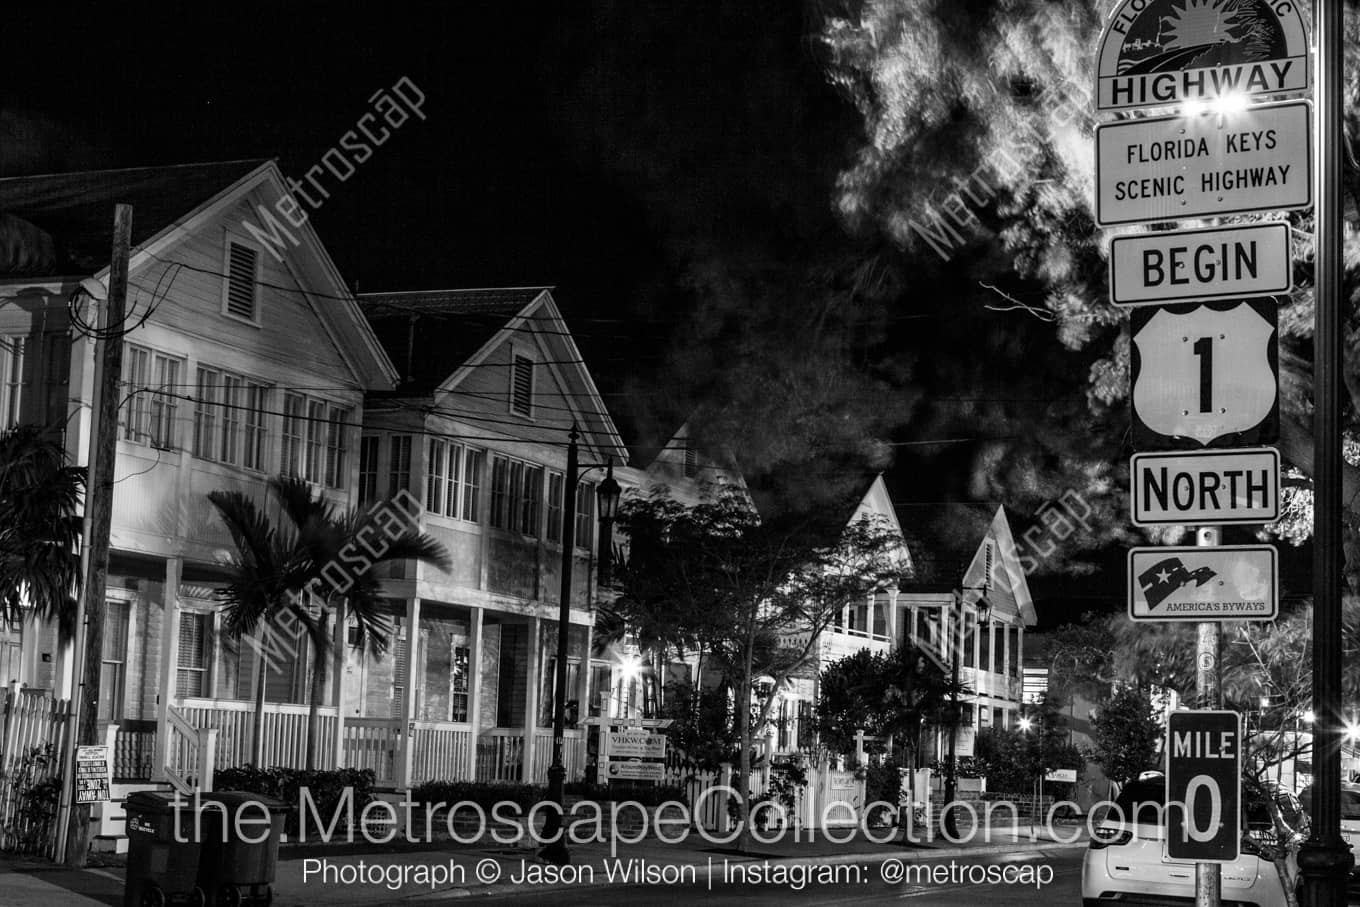 Key West Florida Picture at Night